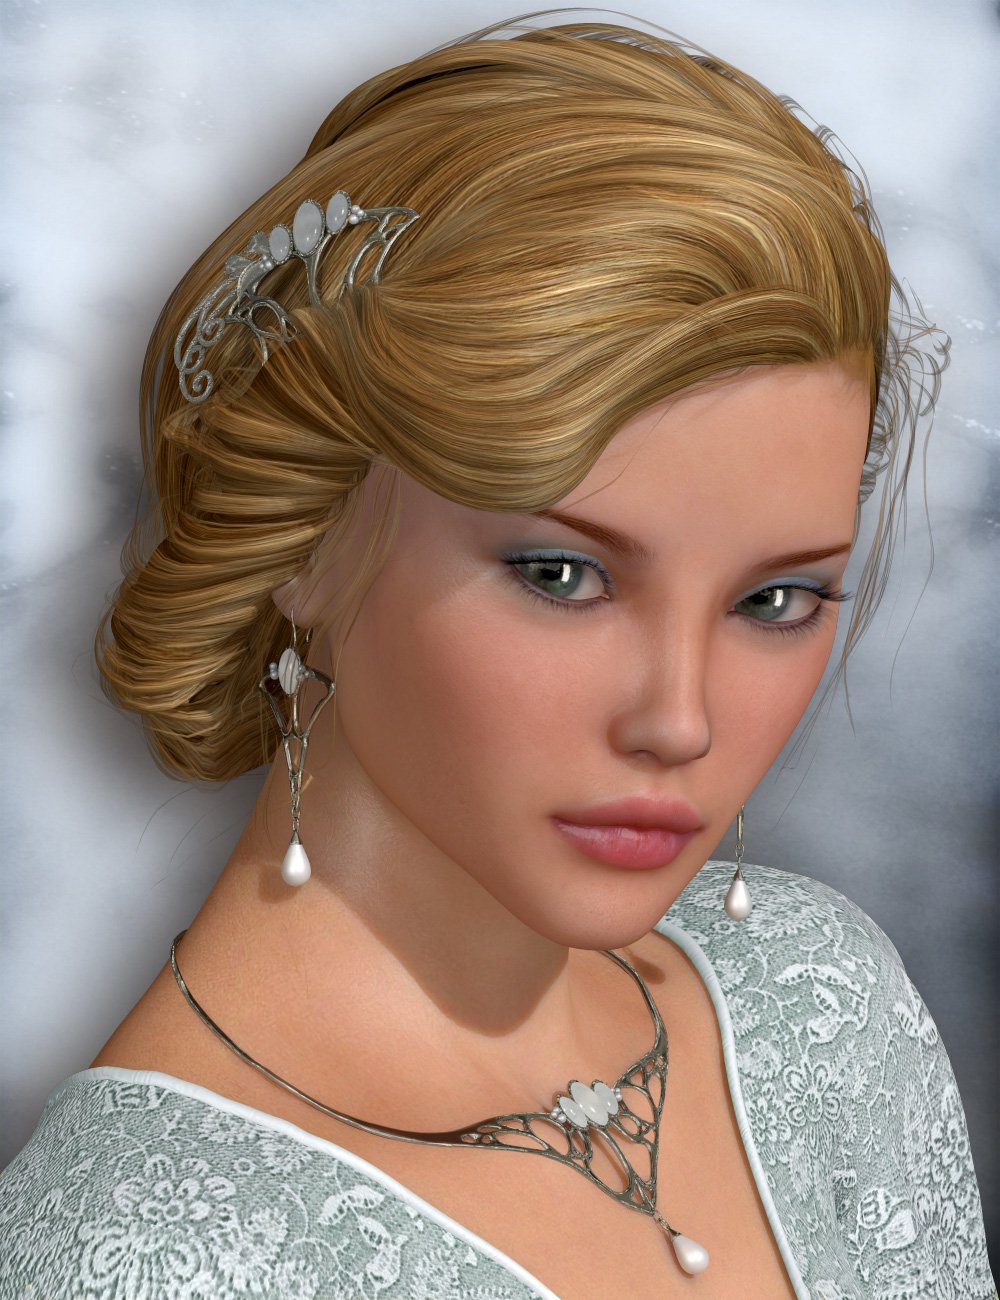 Baroness Jewels by: esha, 3D Models by Daz 3D